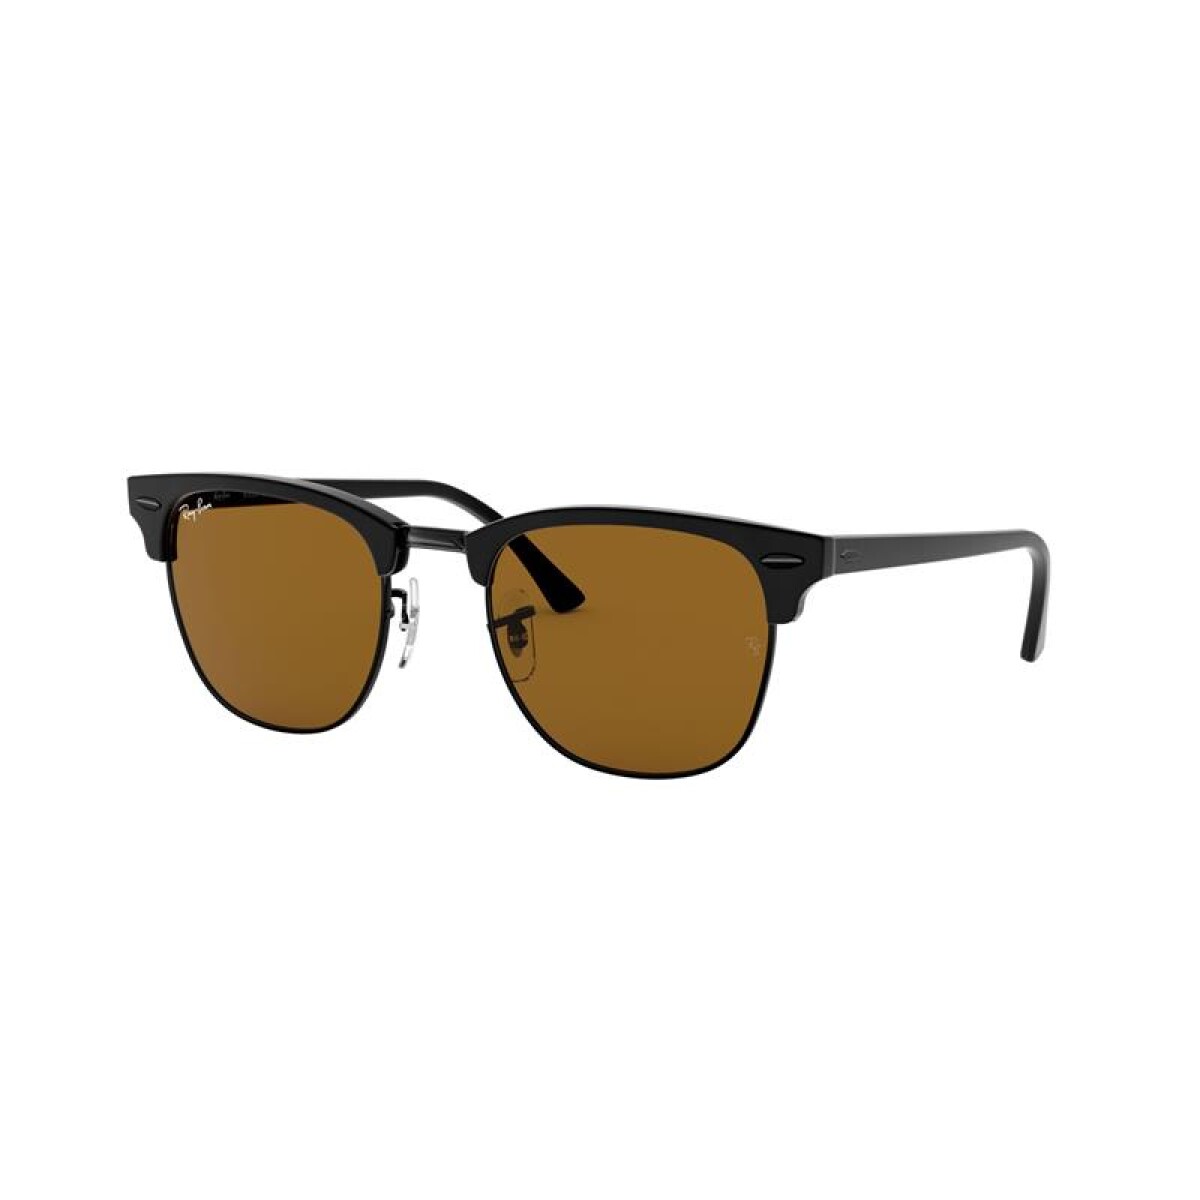 Ray Ban Rb3016 - W3389 